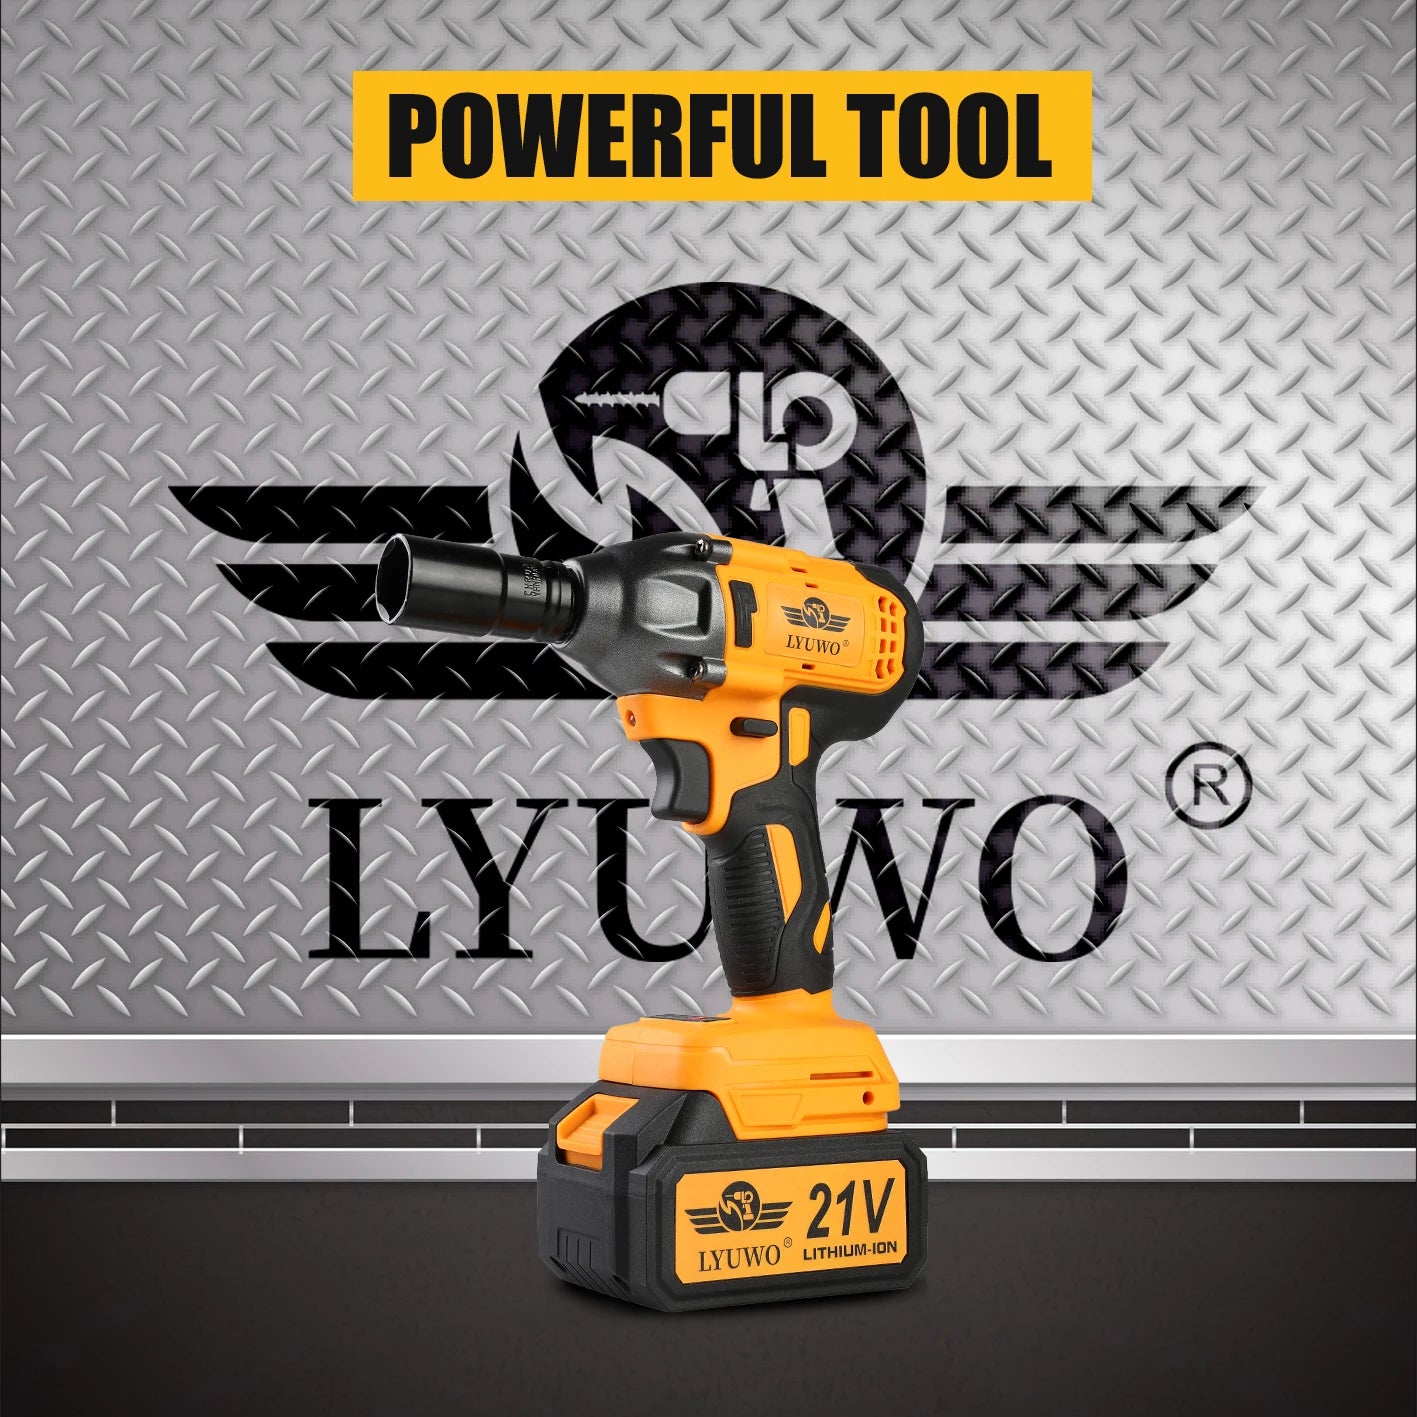 LYUWO Electric Wrench 350NM Brushless Electric Wrench High Torque Air Cannon Heavy Duty Automobile Repair High Power Impact Plat